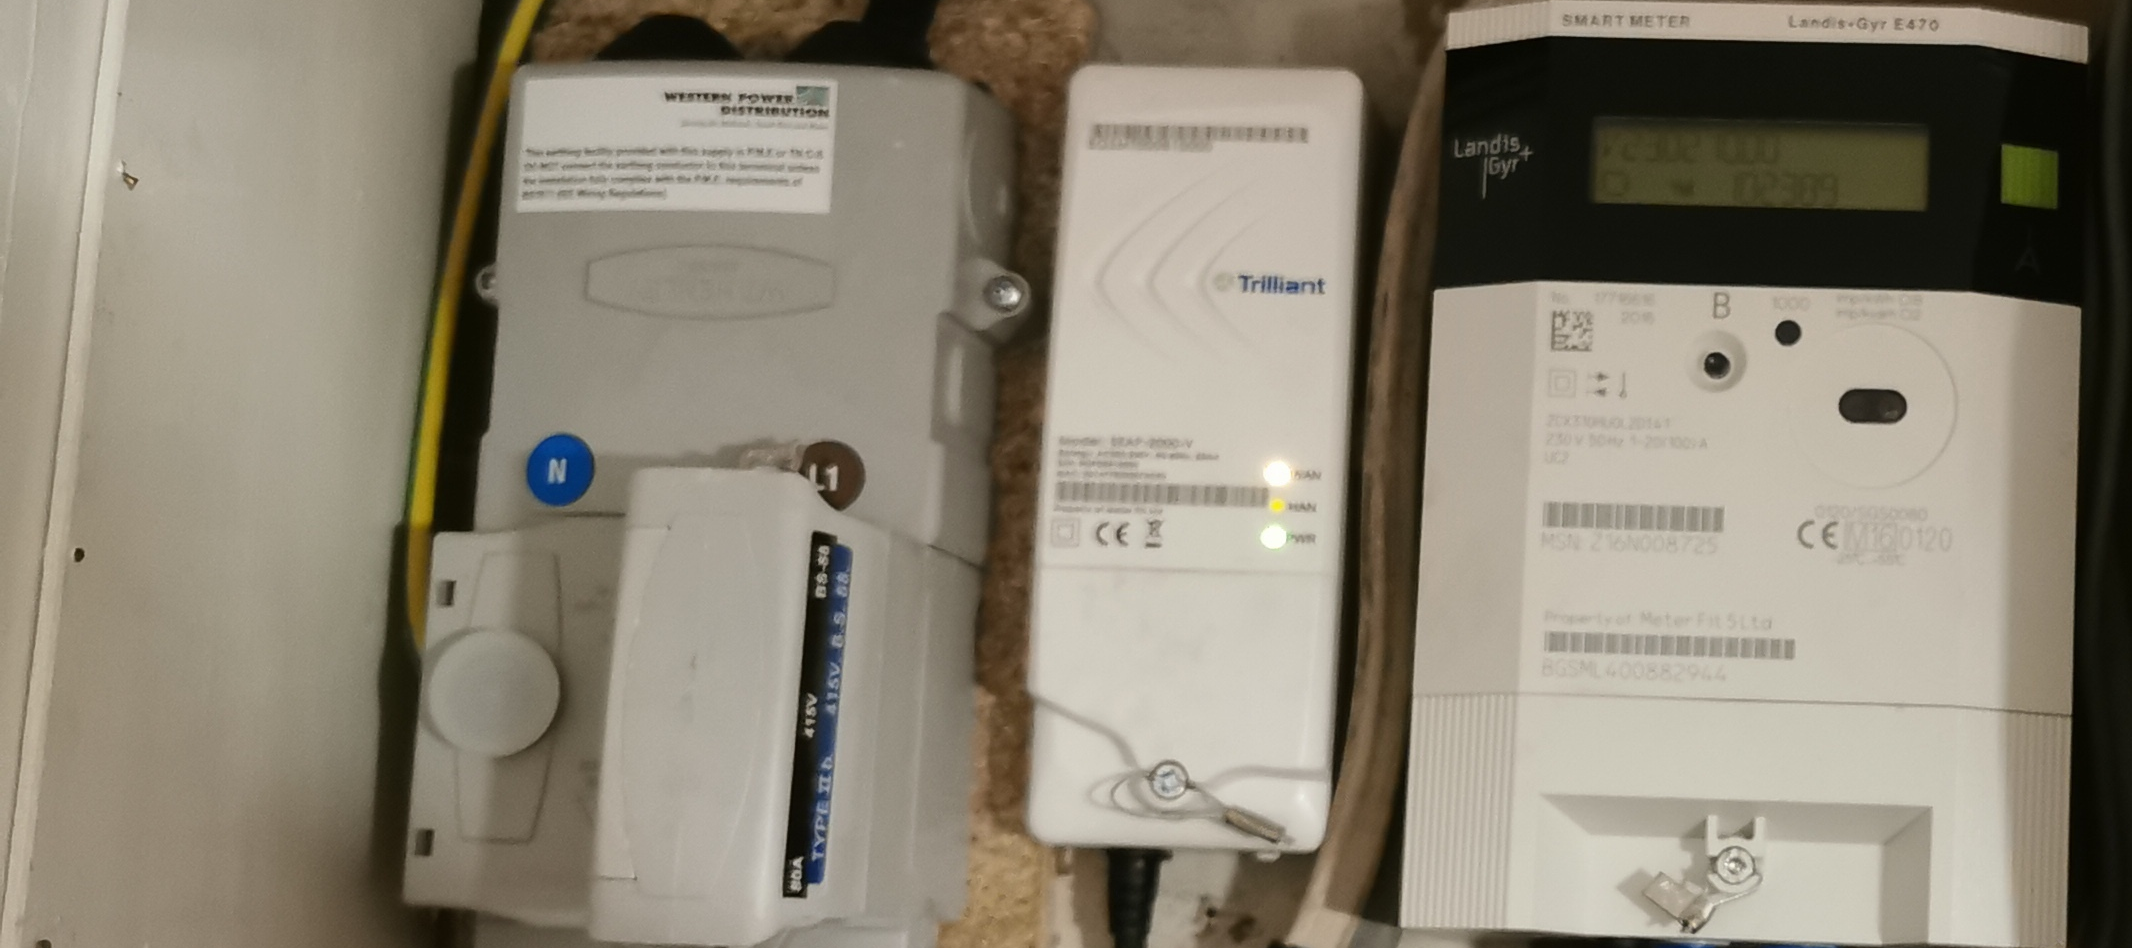 Landis+Gyr E470 smart meter unofficial guide - How to tell if you've got the SMETS1 or SMETS2 version